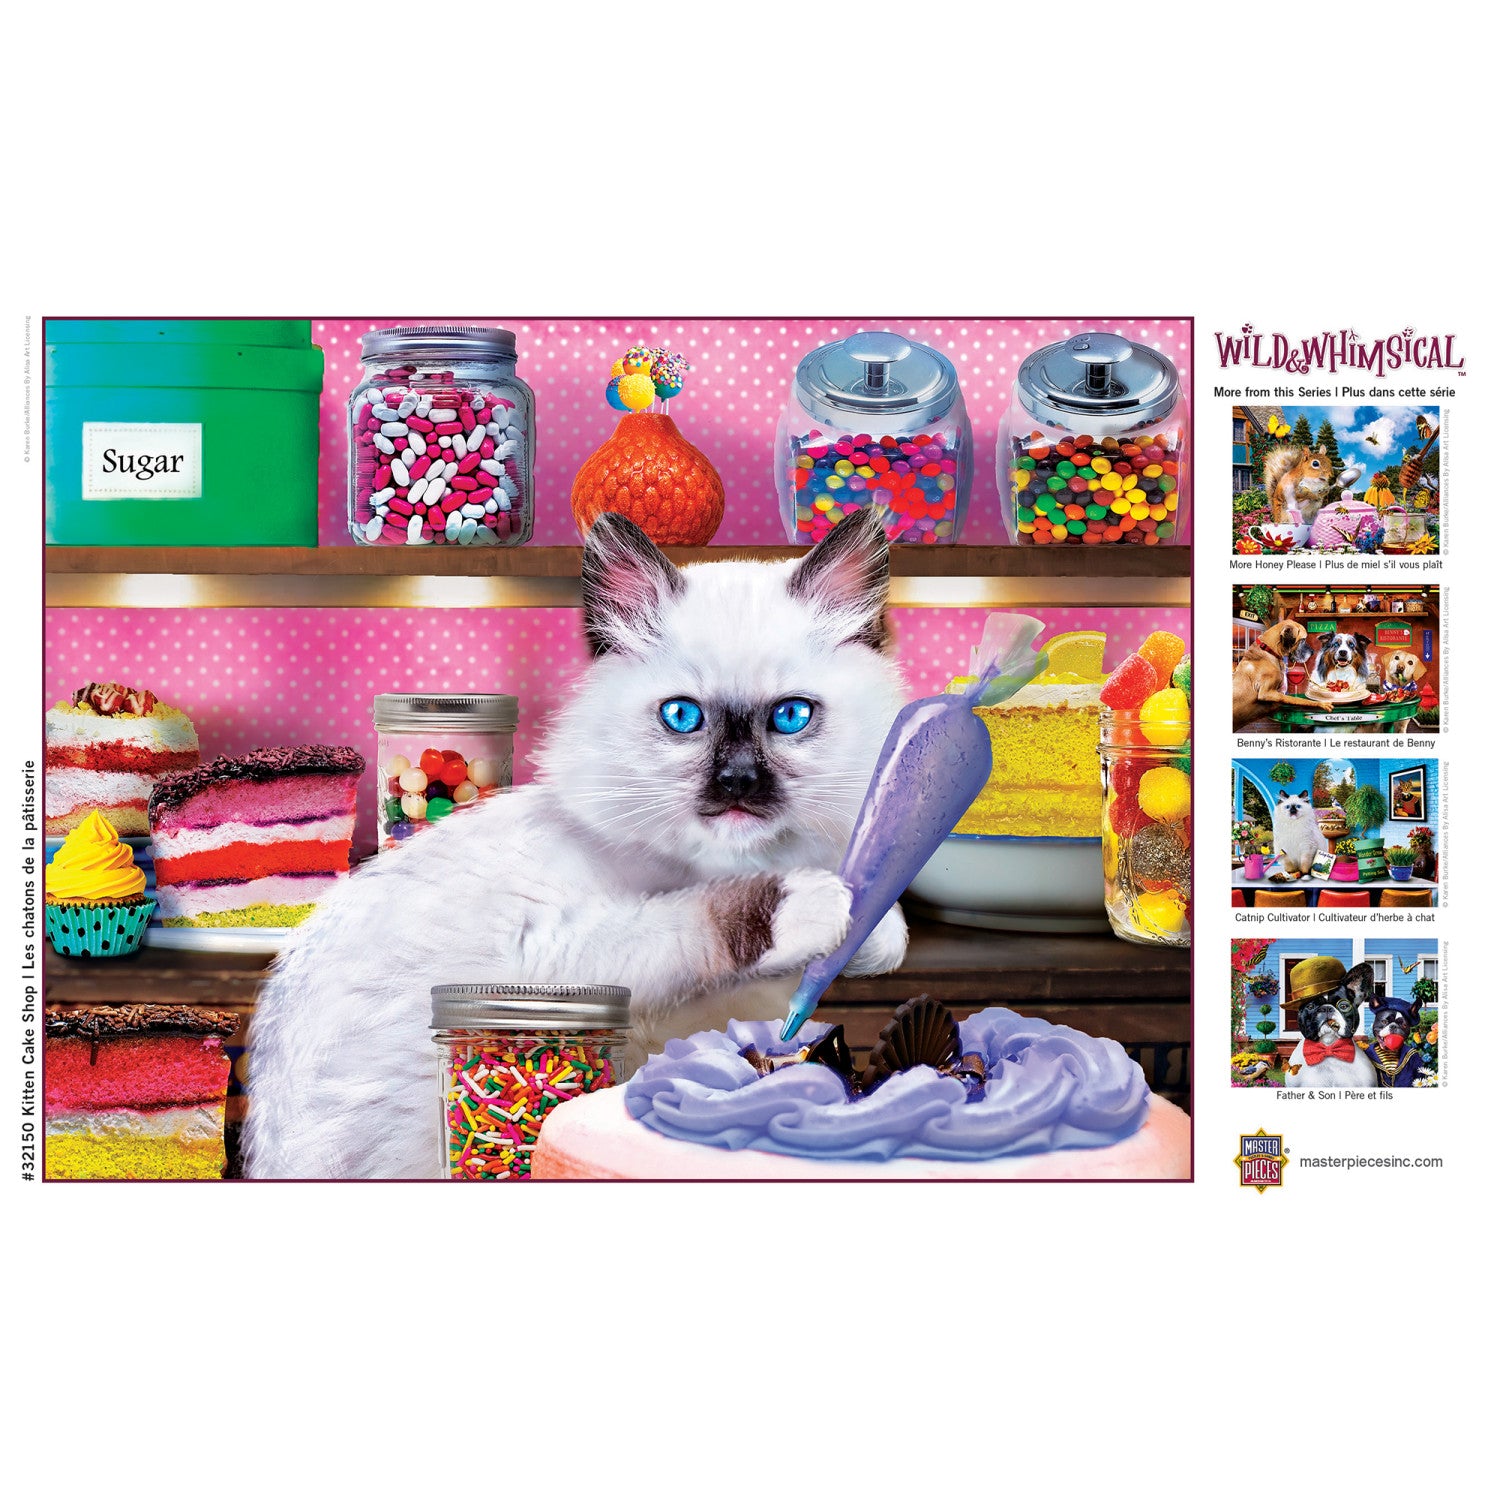 Wild & Whimsical - Kitten Cake Shop 300 Piece Puzzle